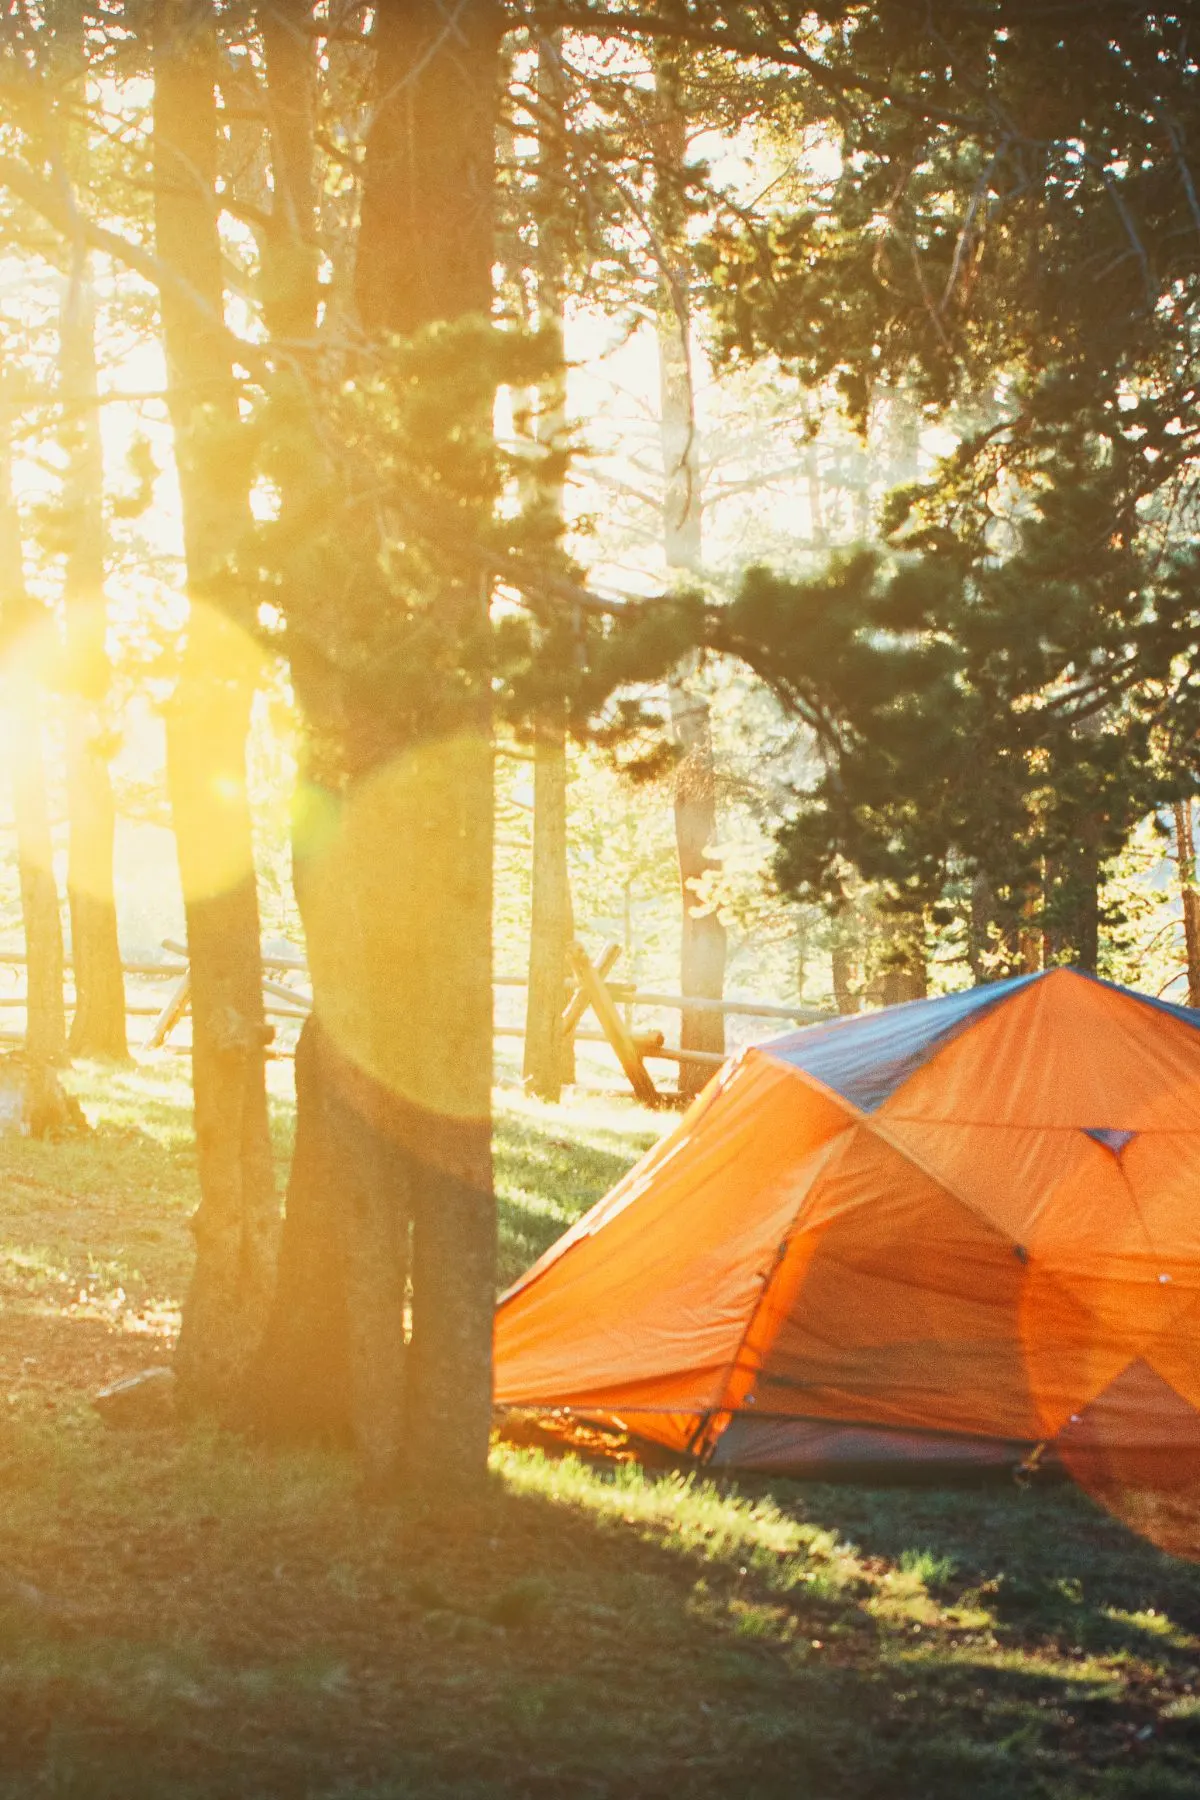 Orange camping tent in wooded forest with sun glare.